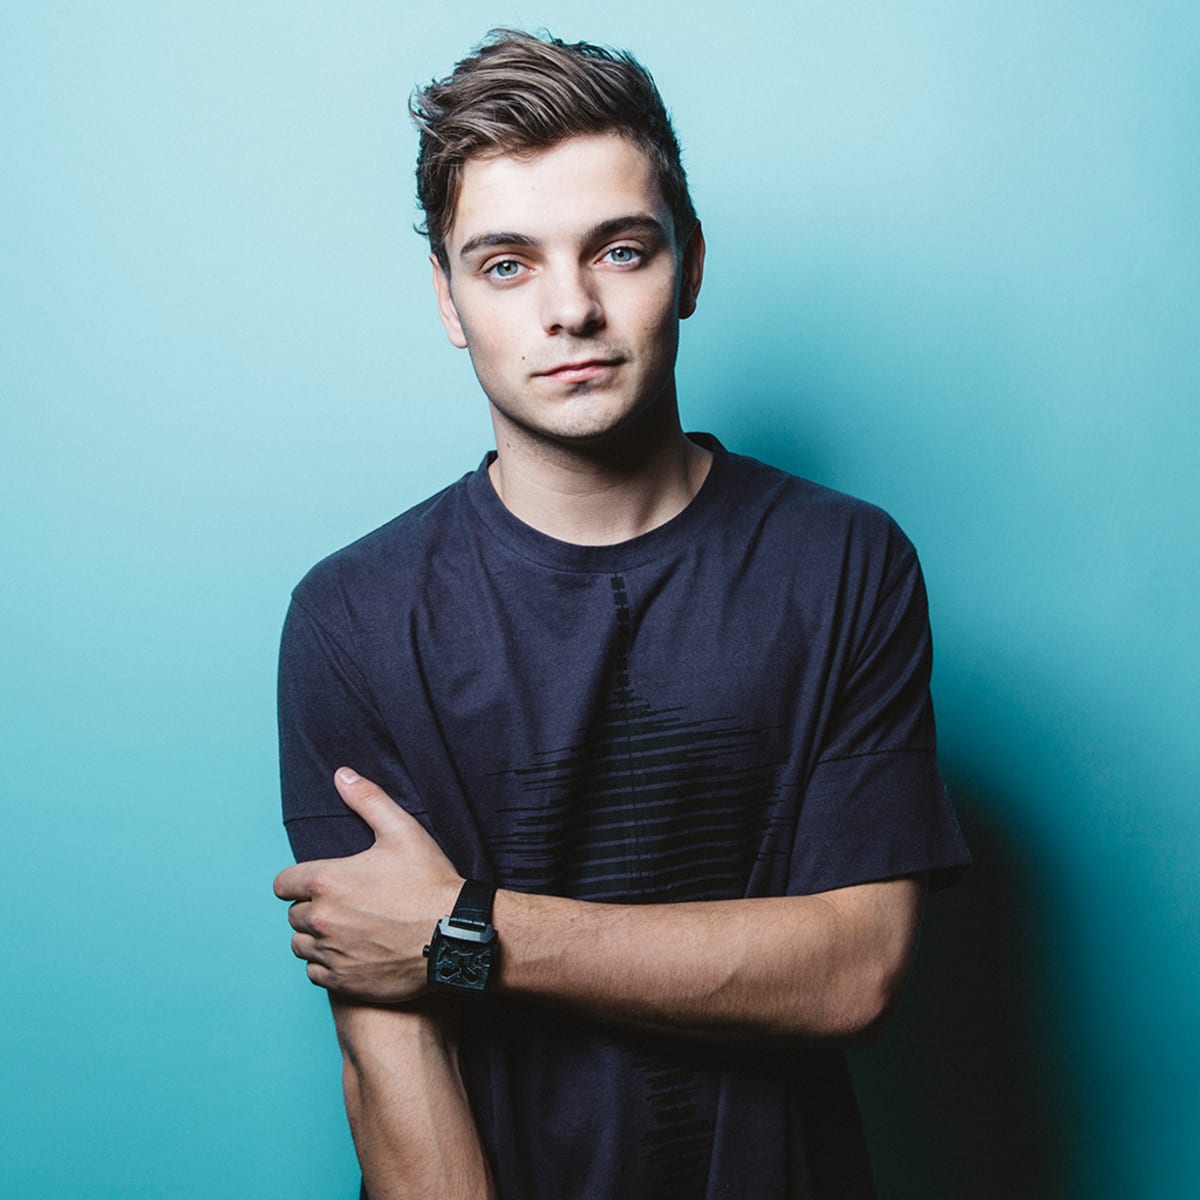 Martin Garrix Attends UEFA Euro 2020 Draw Ceremony  - The Latest  Electronic Dance Music News, Reviews & Artists